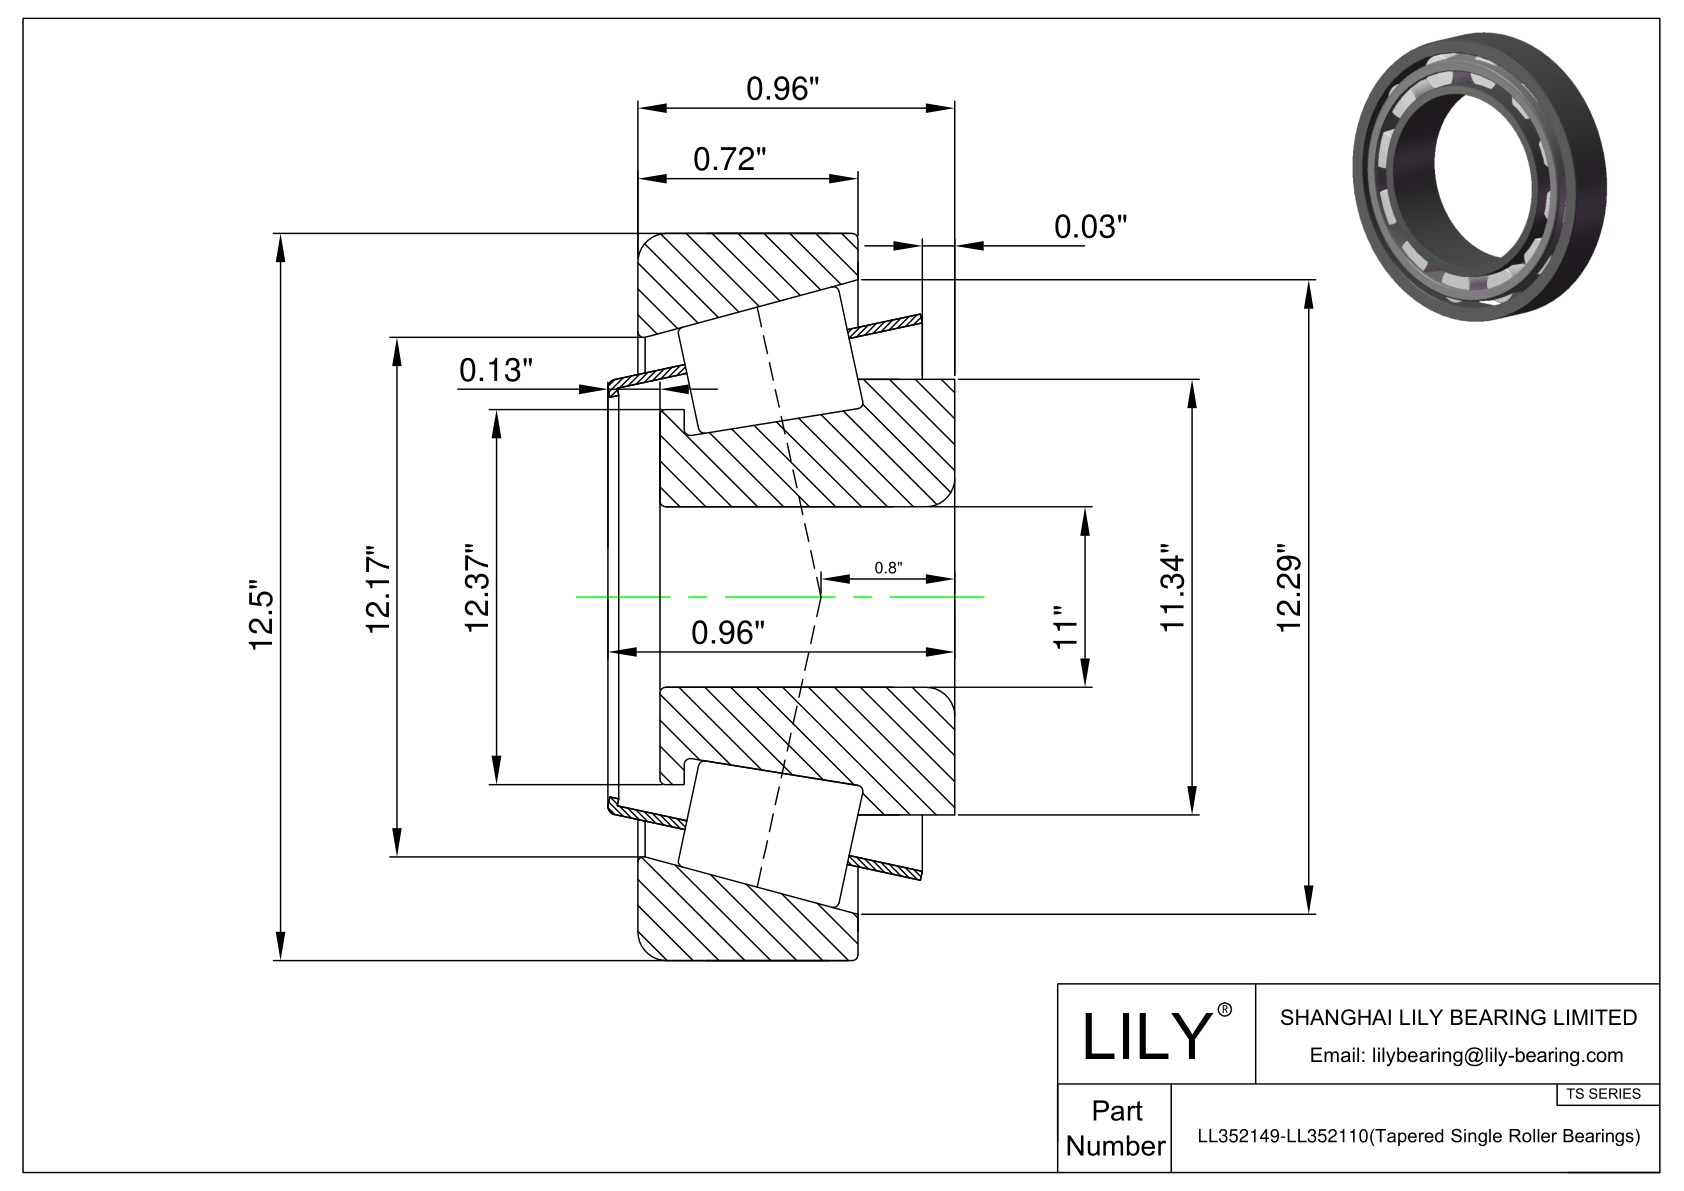 LL352149-LL352110 TS (Tapered Single Roller Bearings) (Imperial) cad drawing